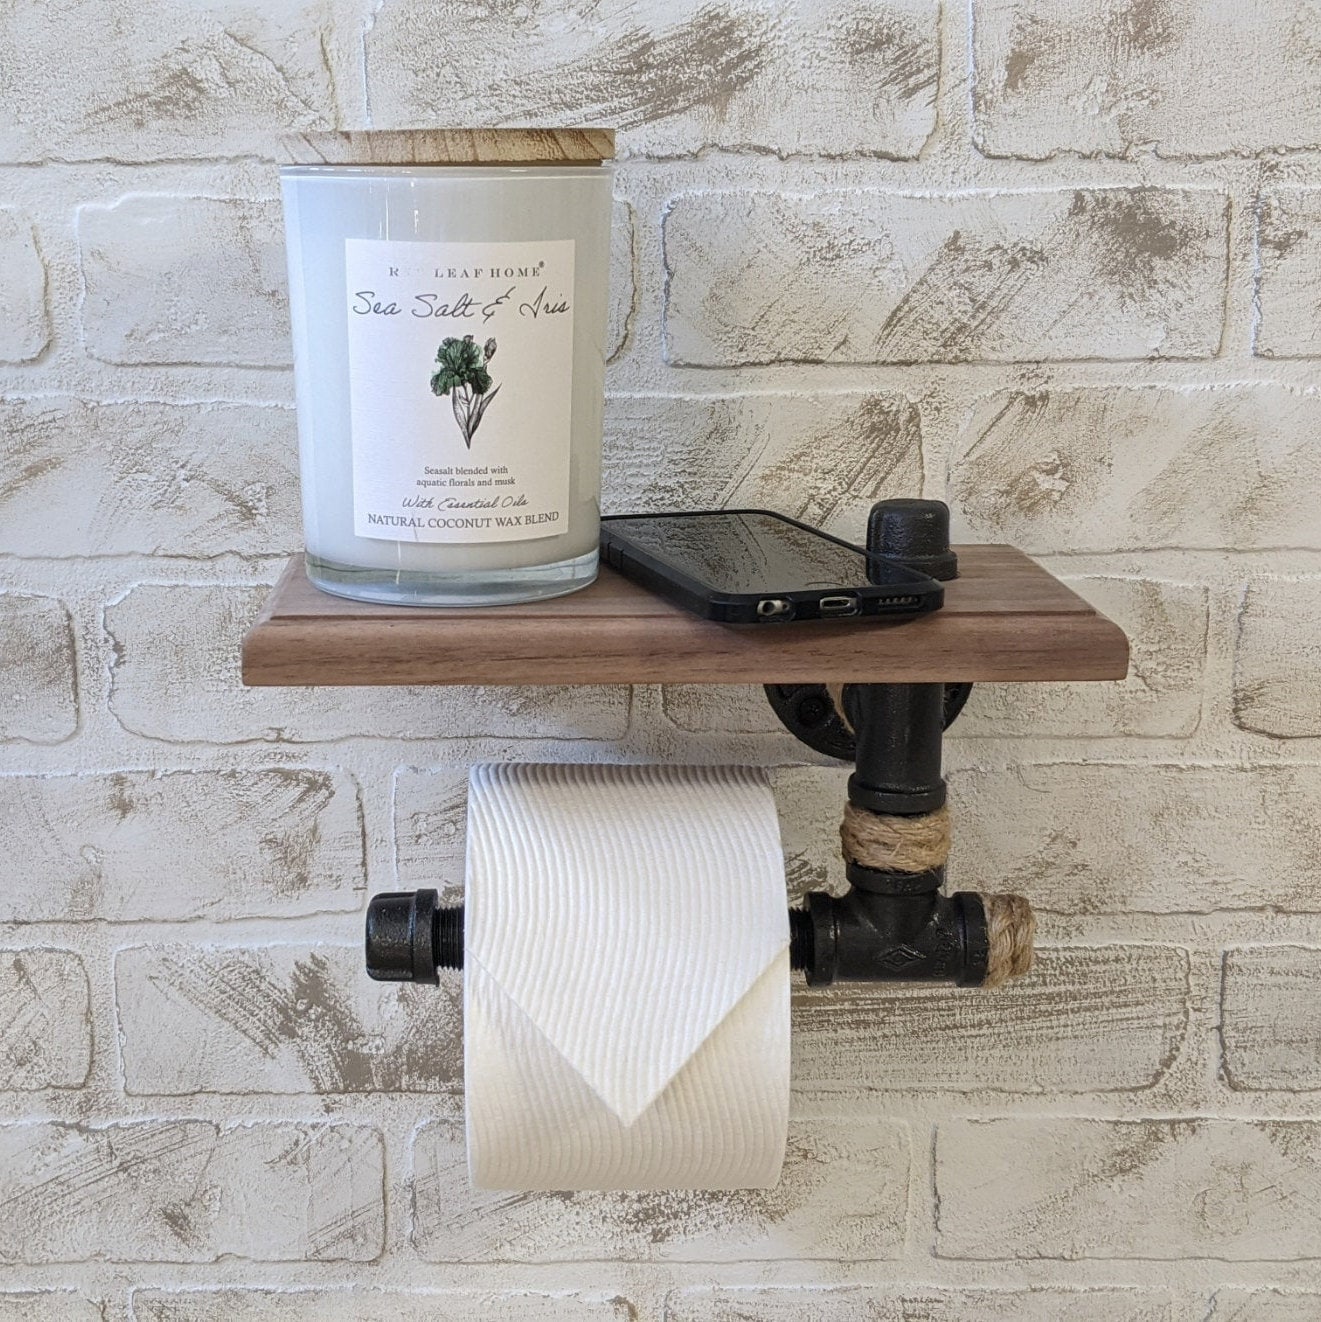 Wood Toilet Paper Holder Wall Mount With Shelf Natural